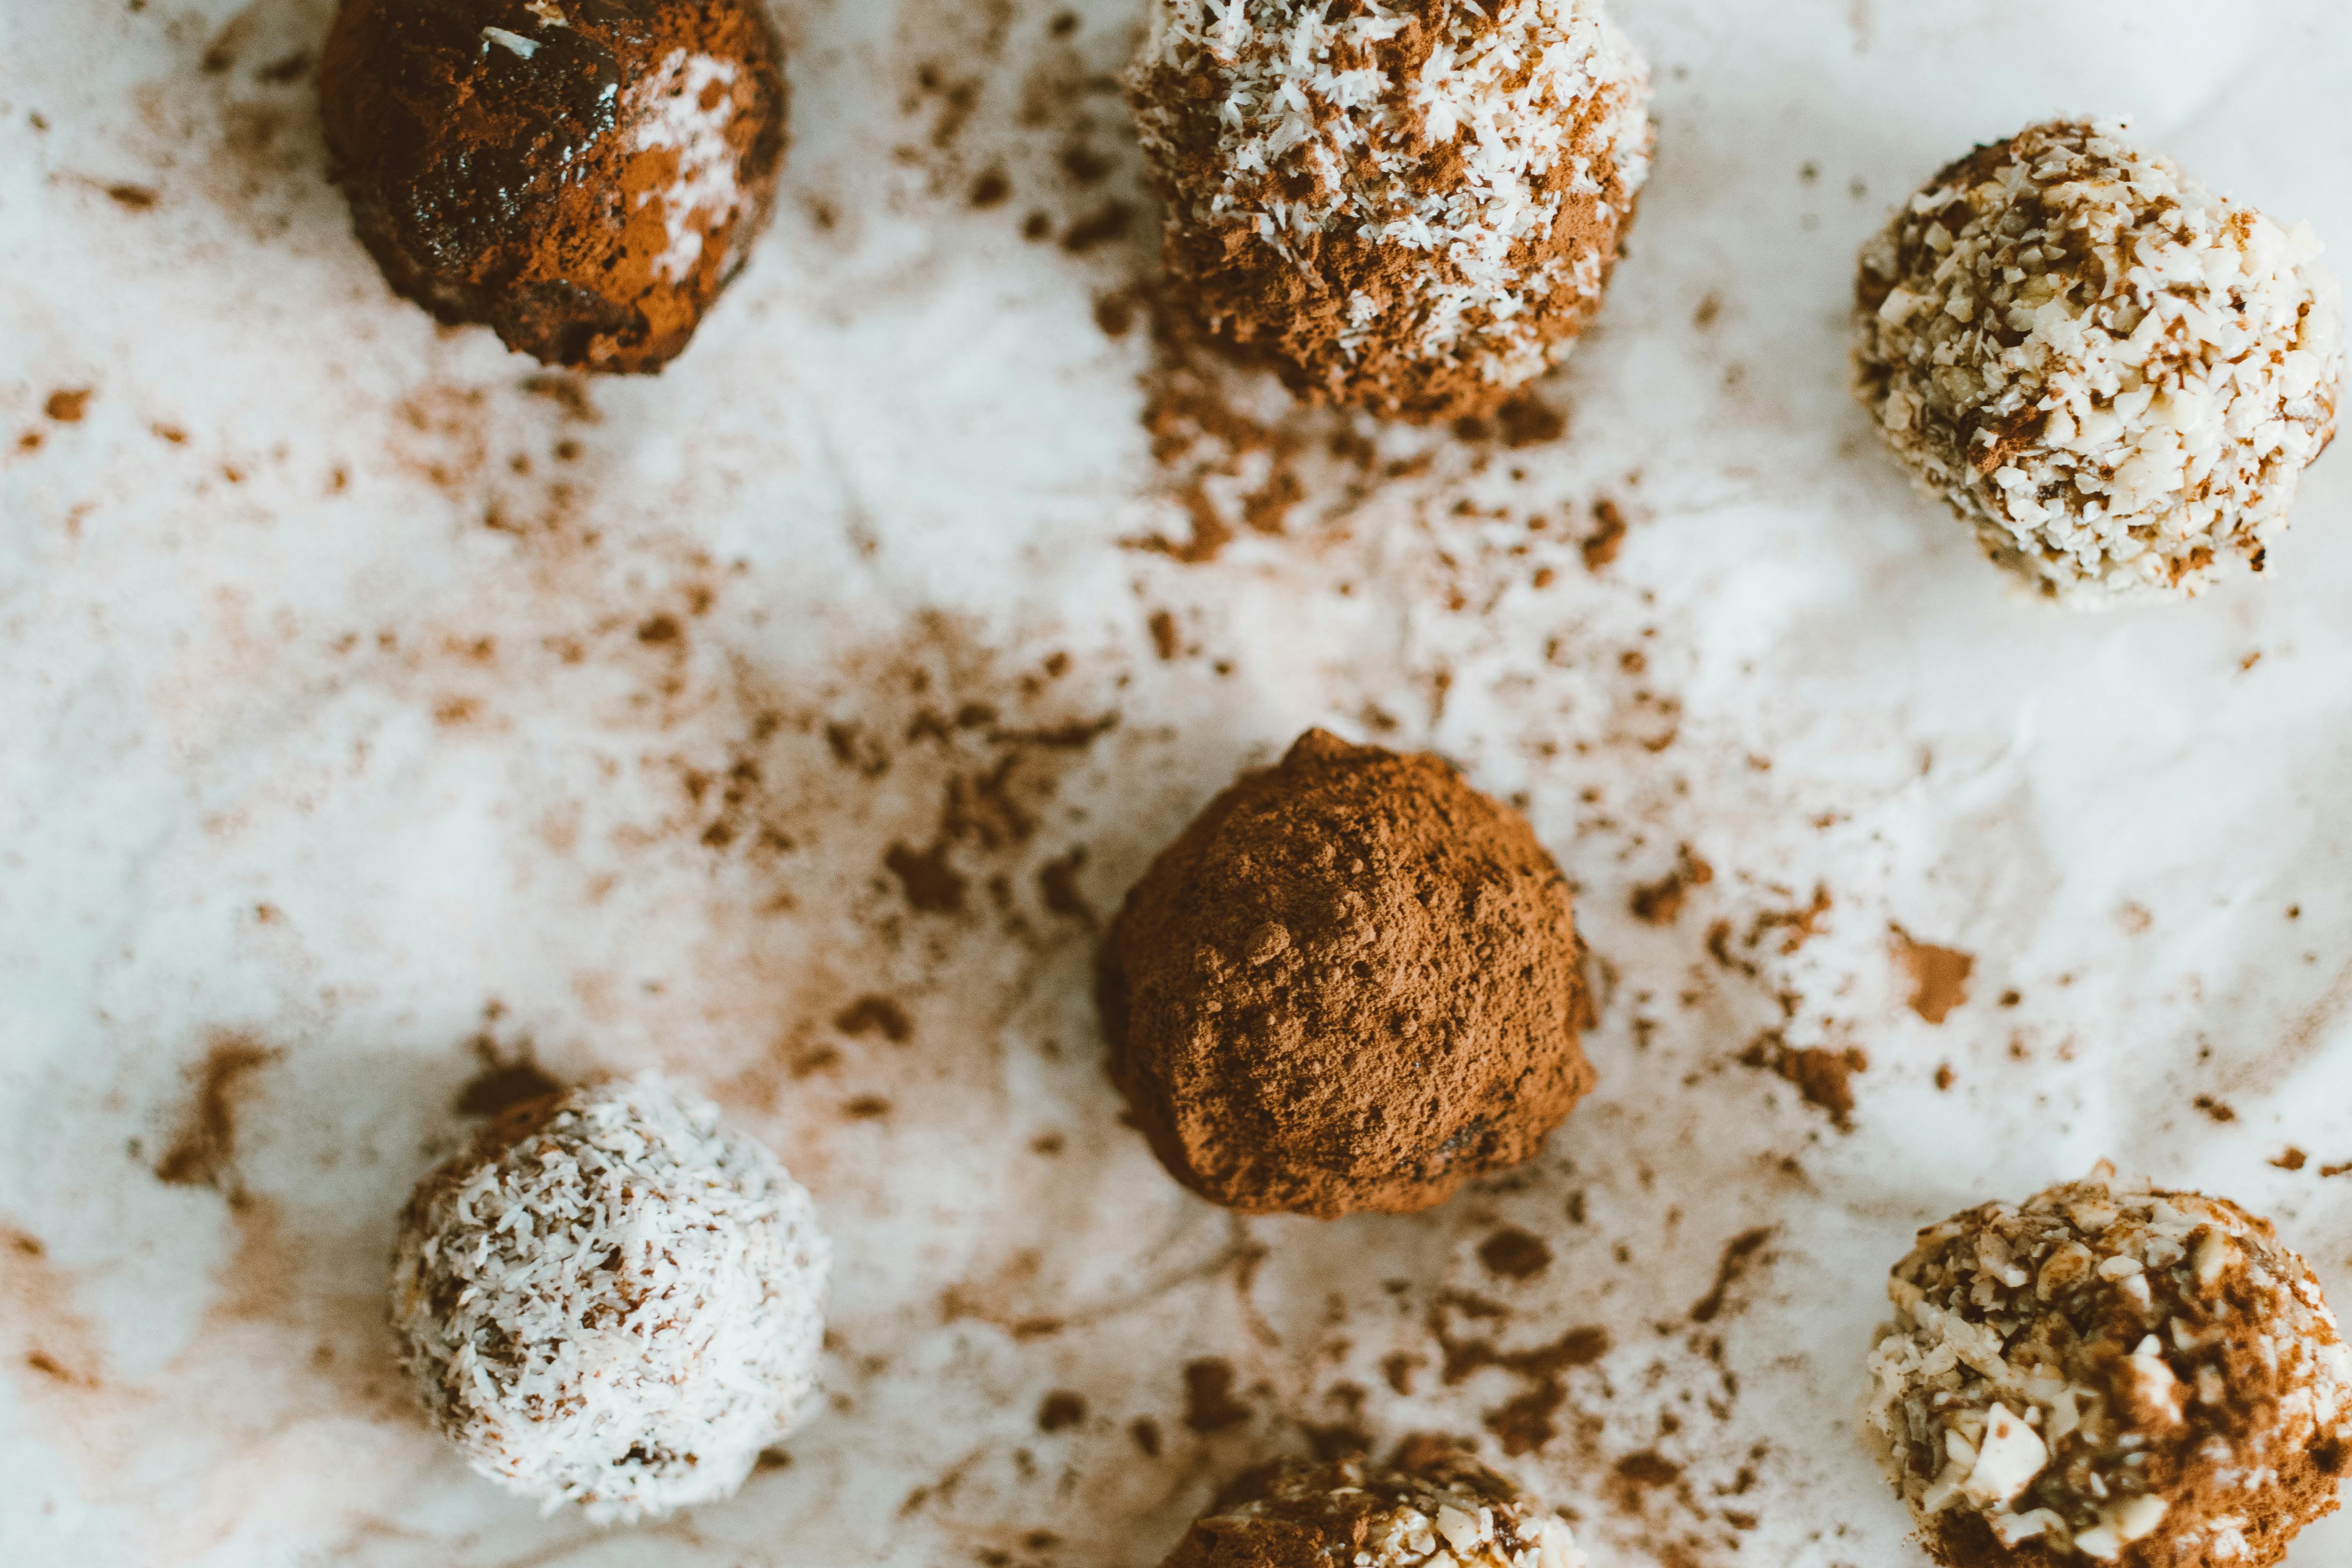 Filled Chocolate and Truffle Workshop – 1 June